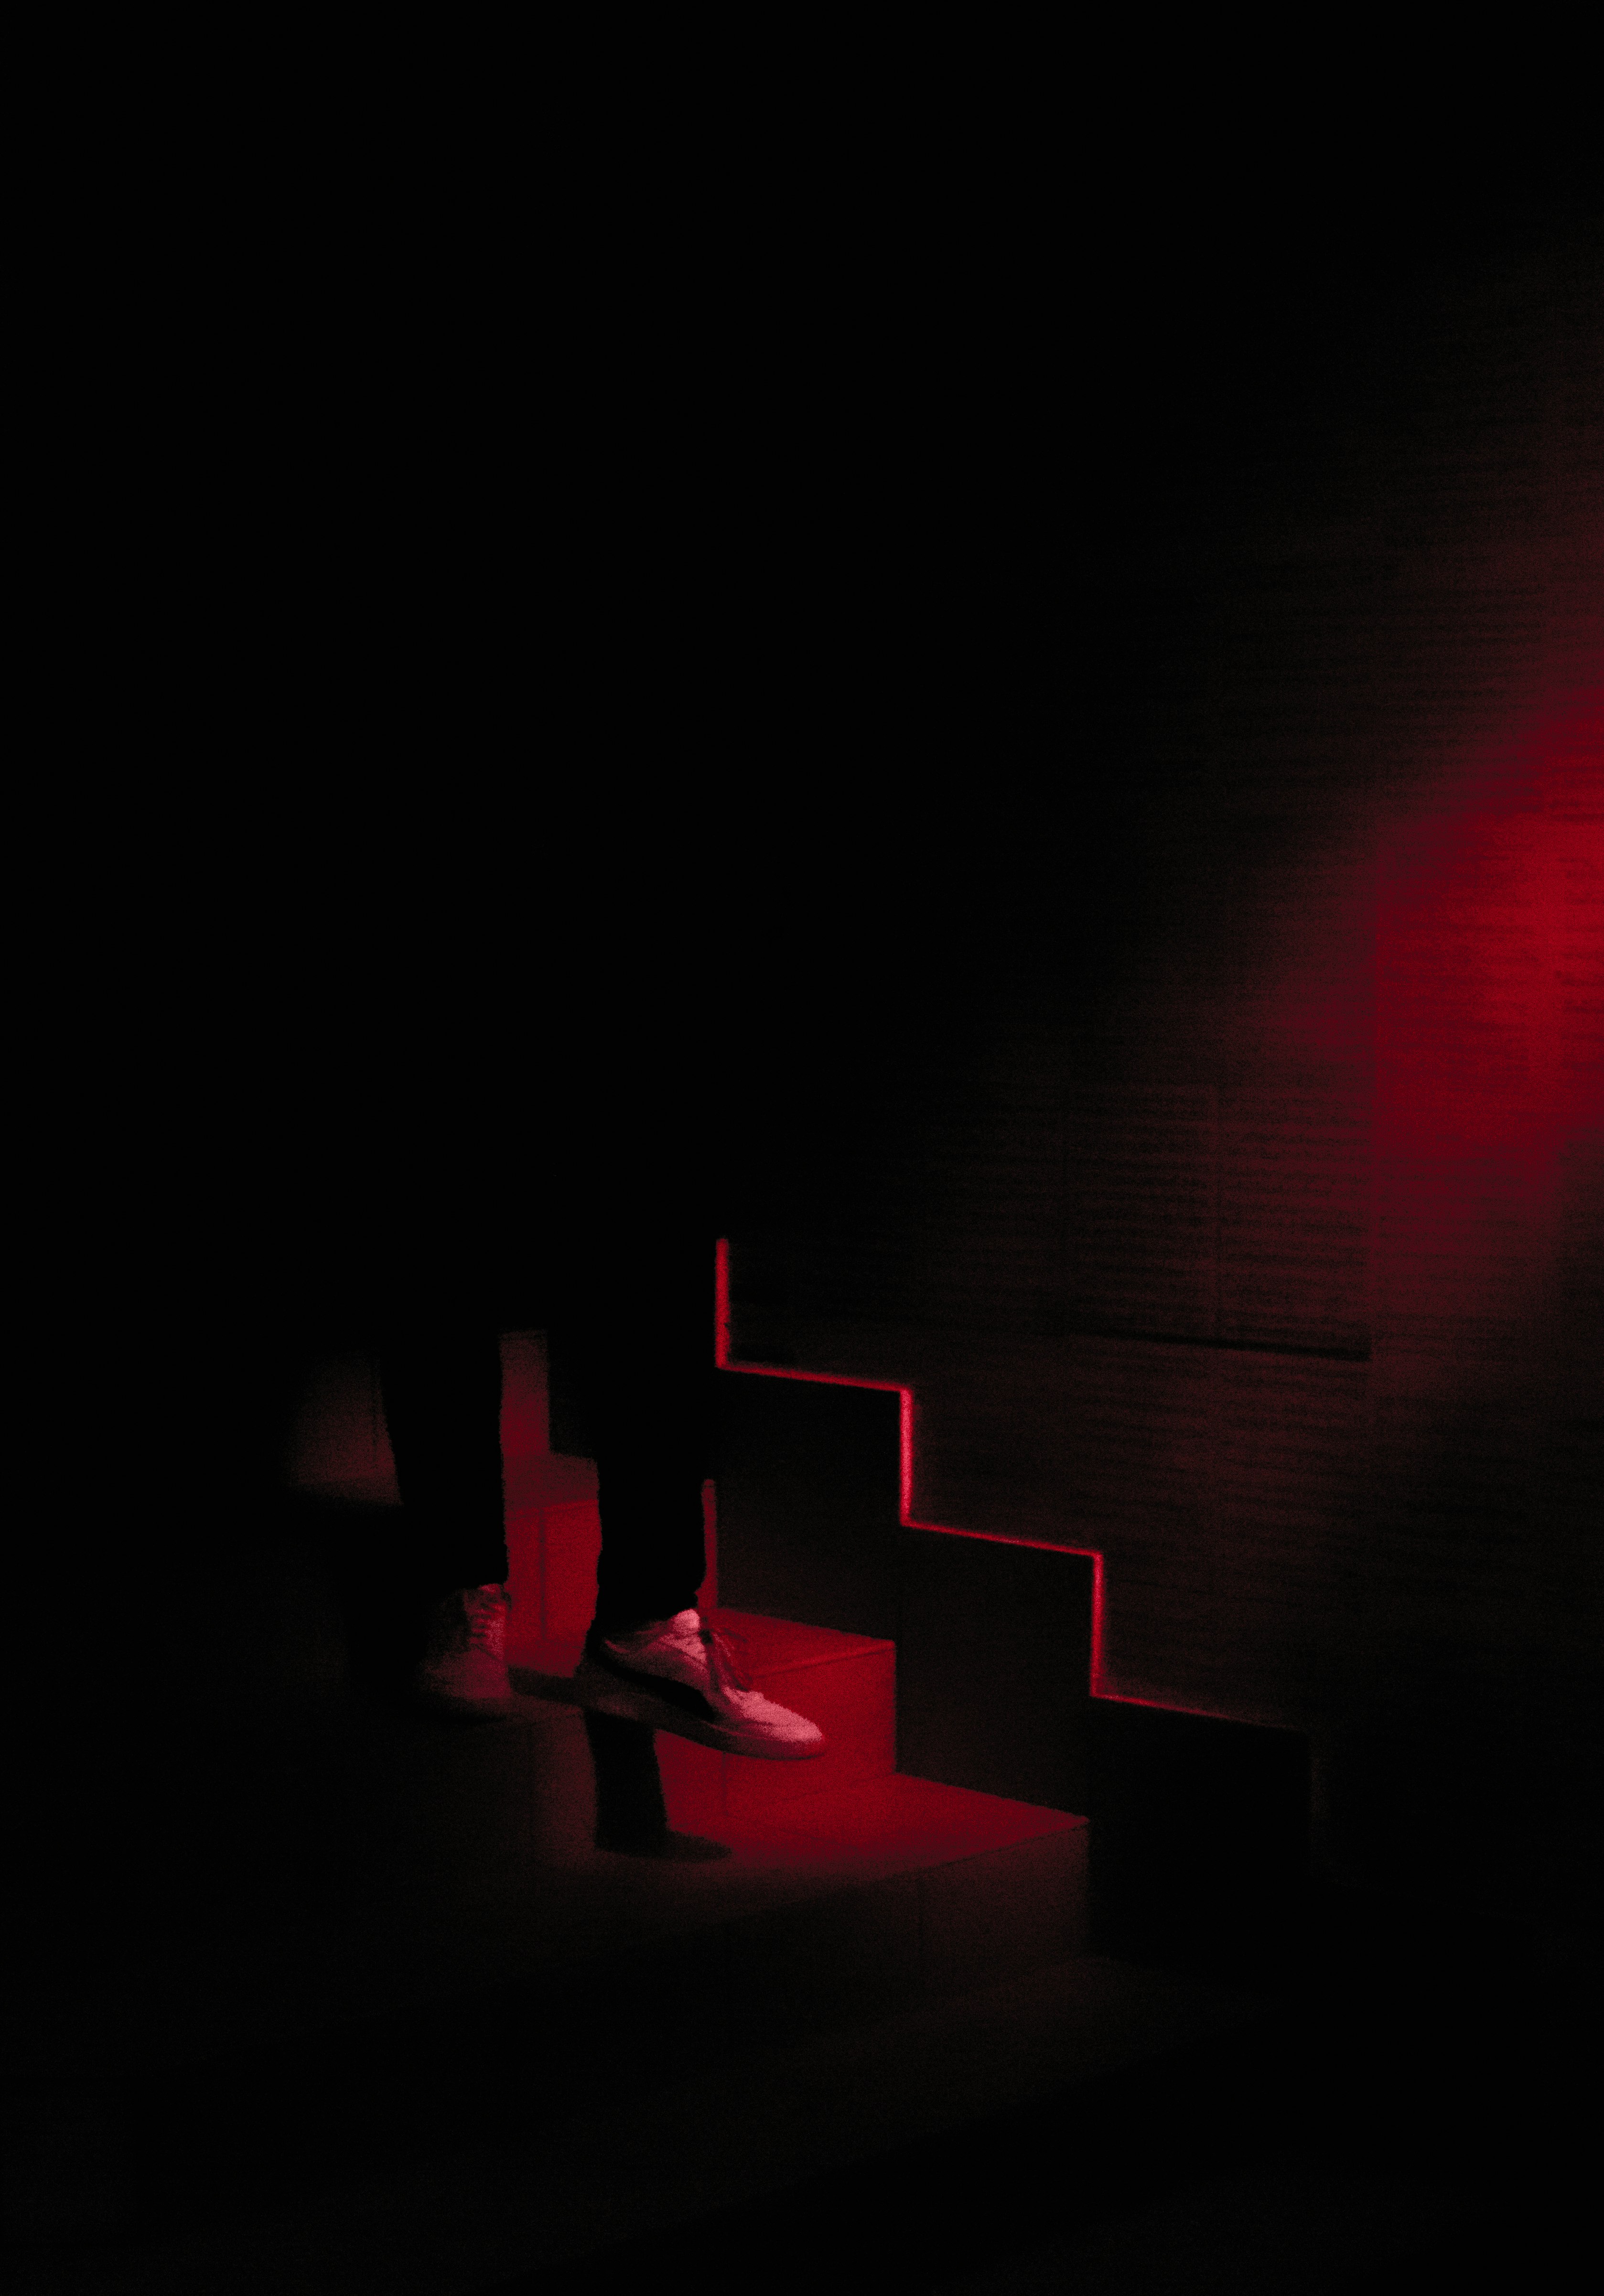 red and black stairs with red lights